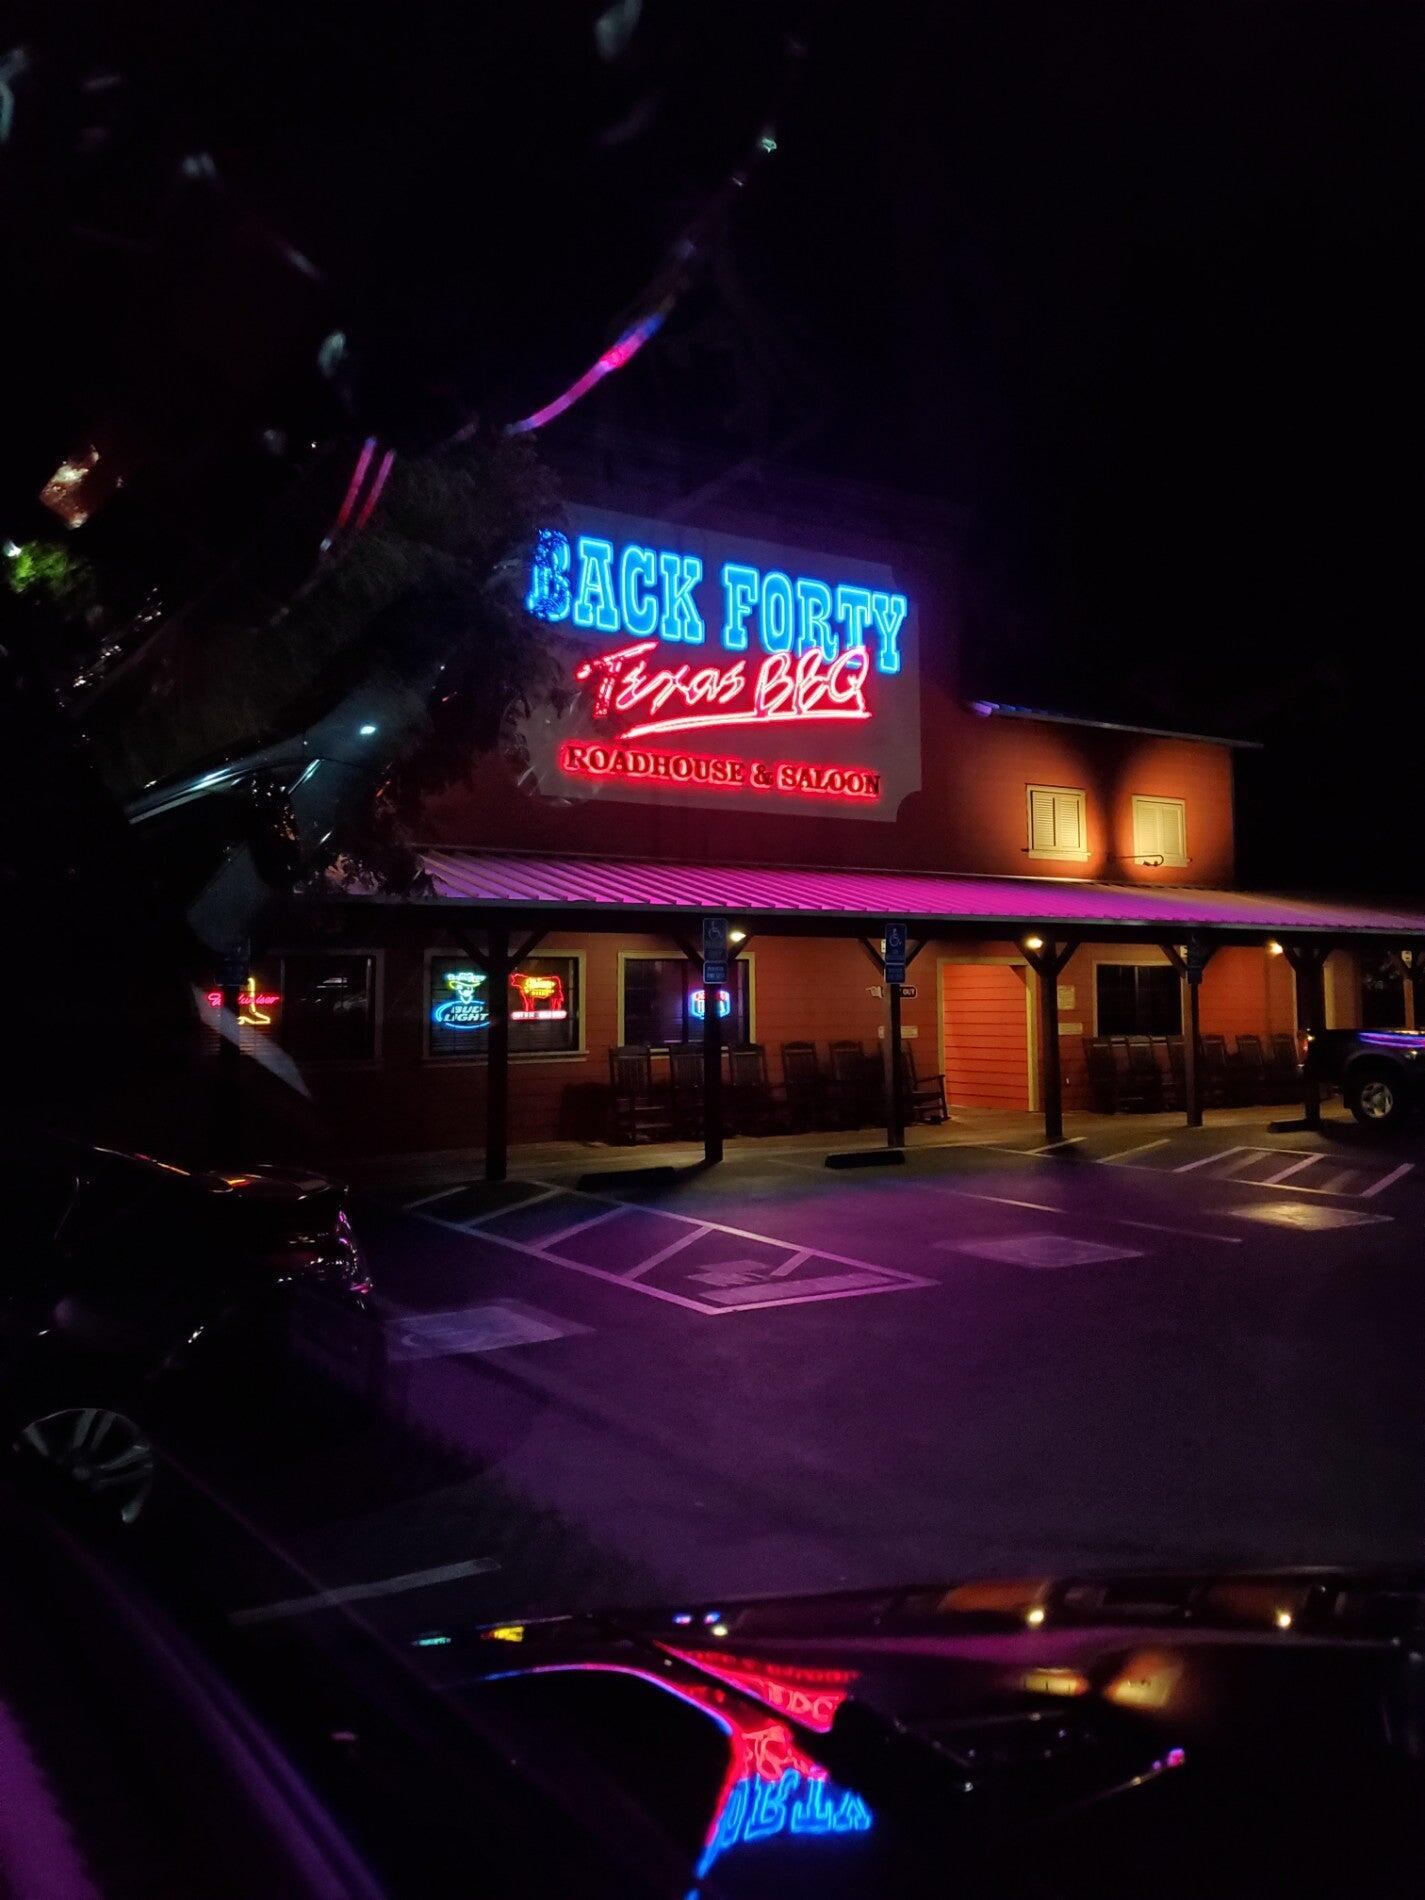 Back Forty Texas BBQ Roadhouse & Saloon